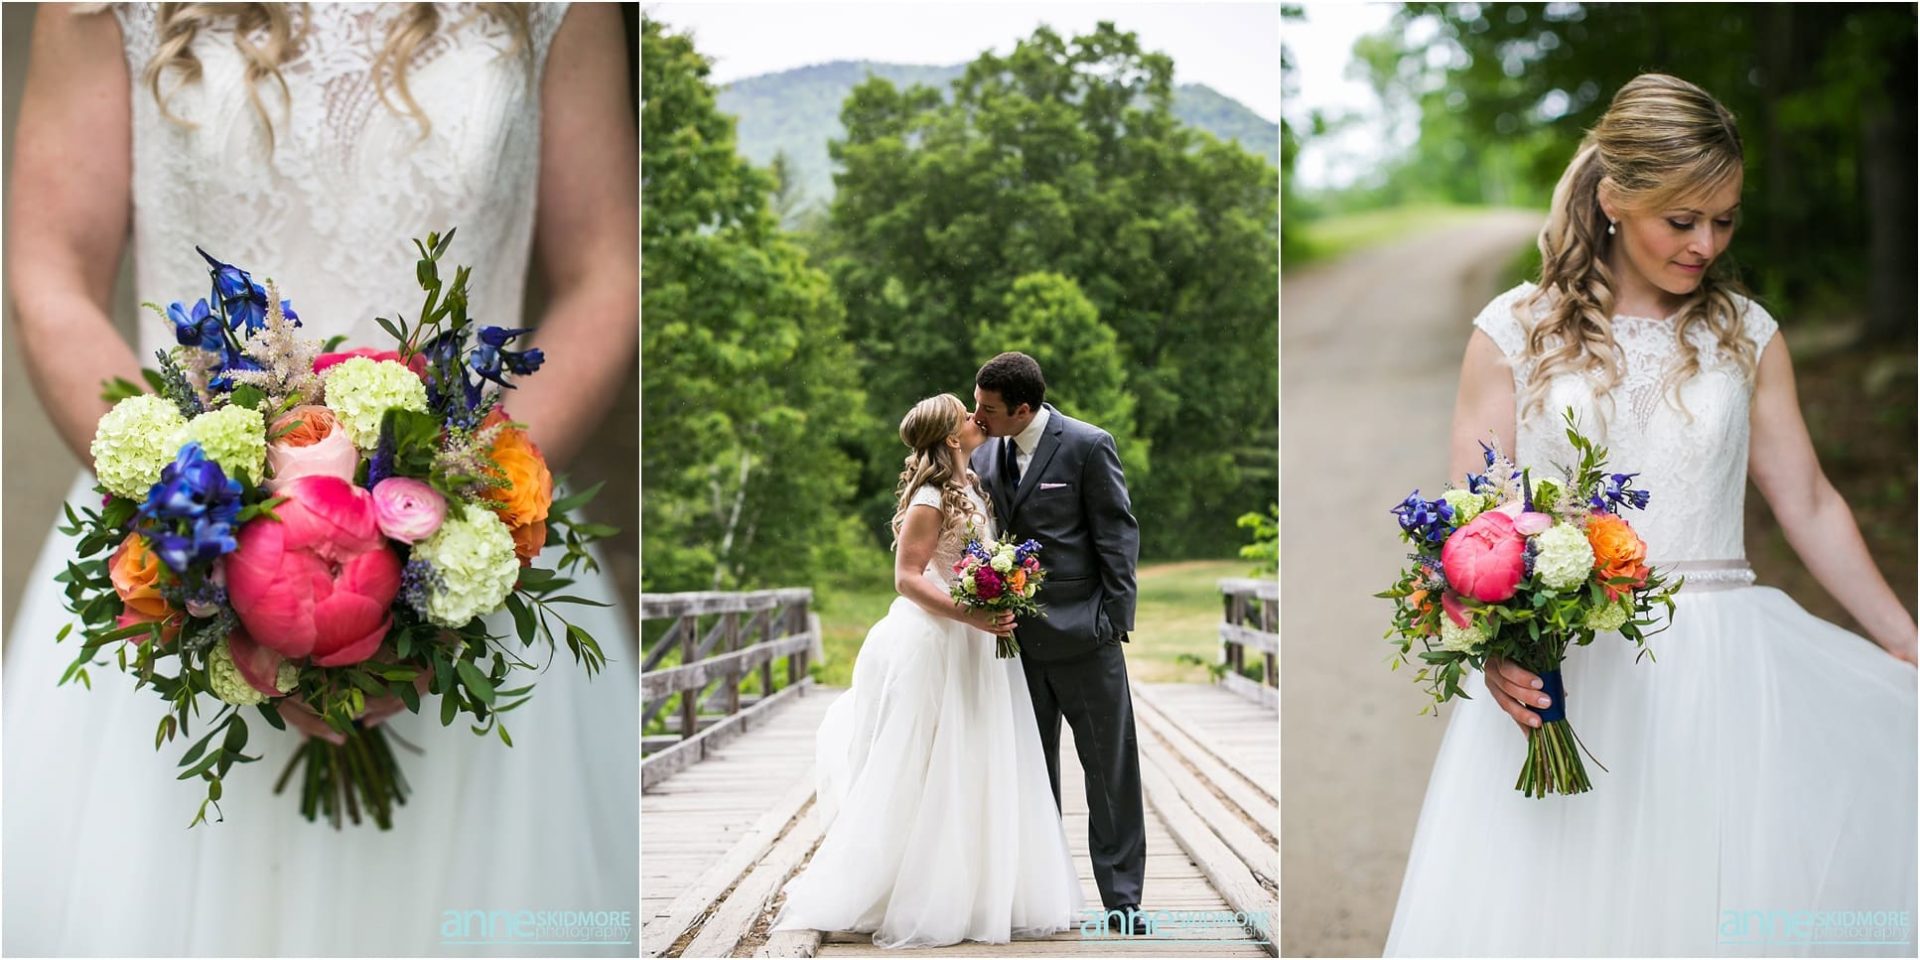 Anne Skidmore Photography - Eagle Mountain House Wedding: Aly & Randy